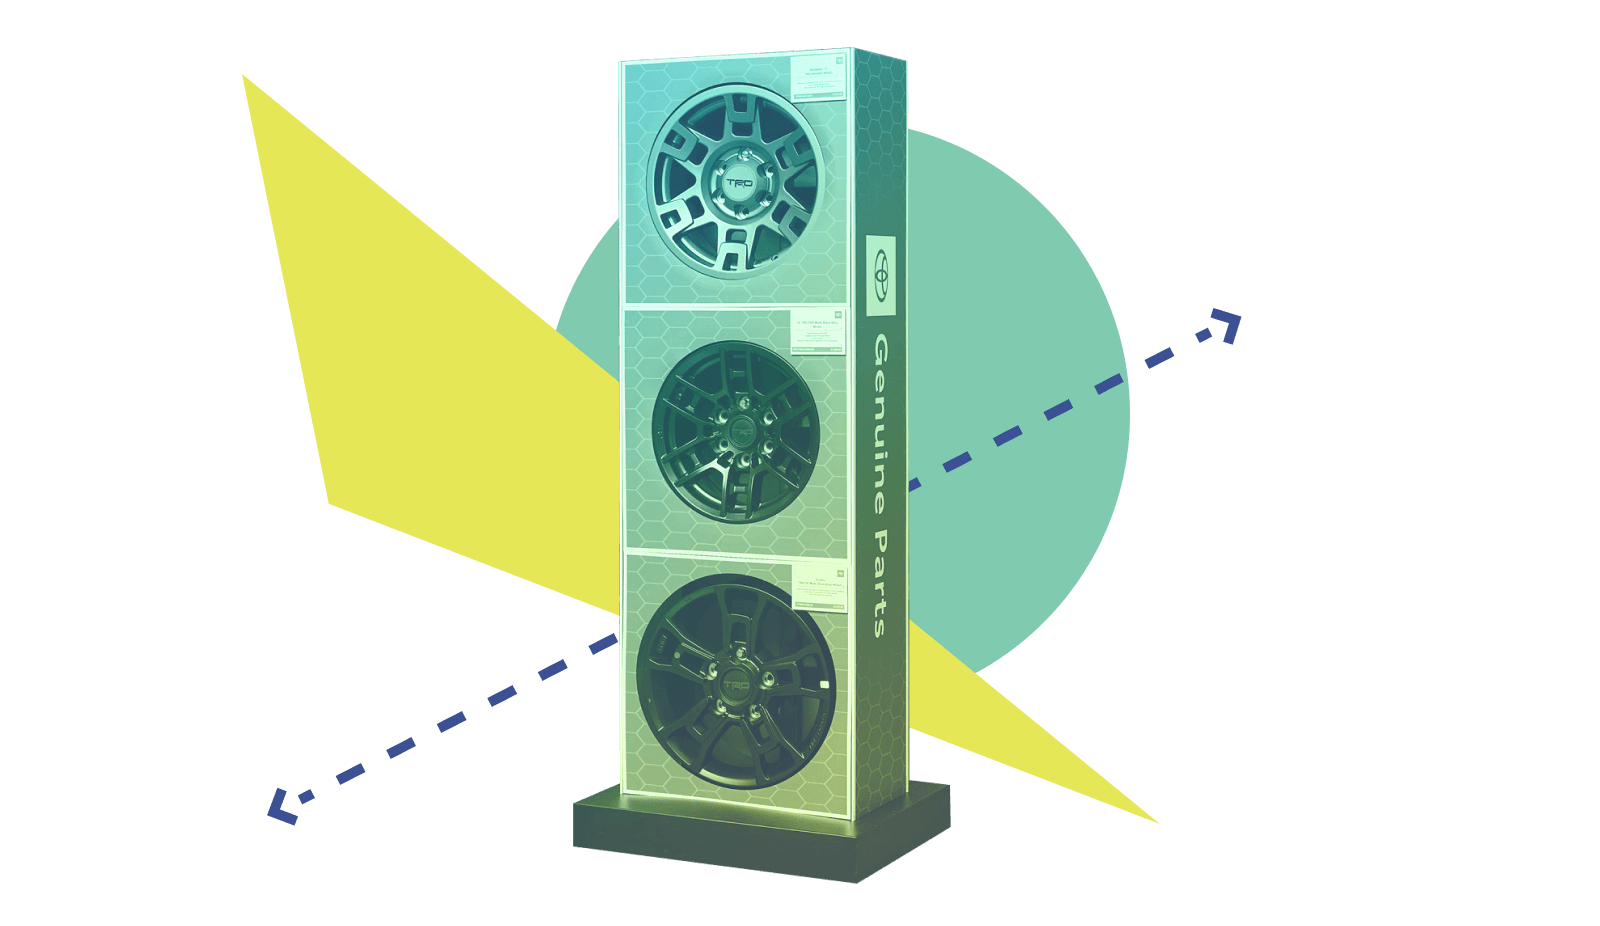 A photo of the UltraGrid wheel tower with abstract shapes behind it and a long, dotted, double-sided arrow to represent dimensions.